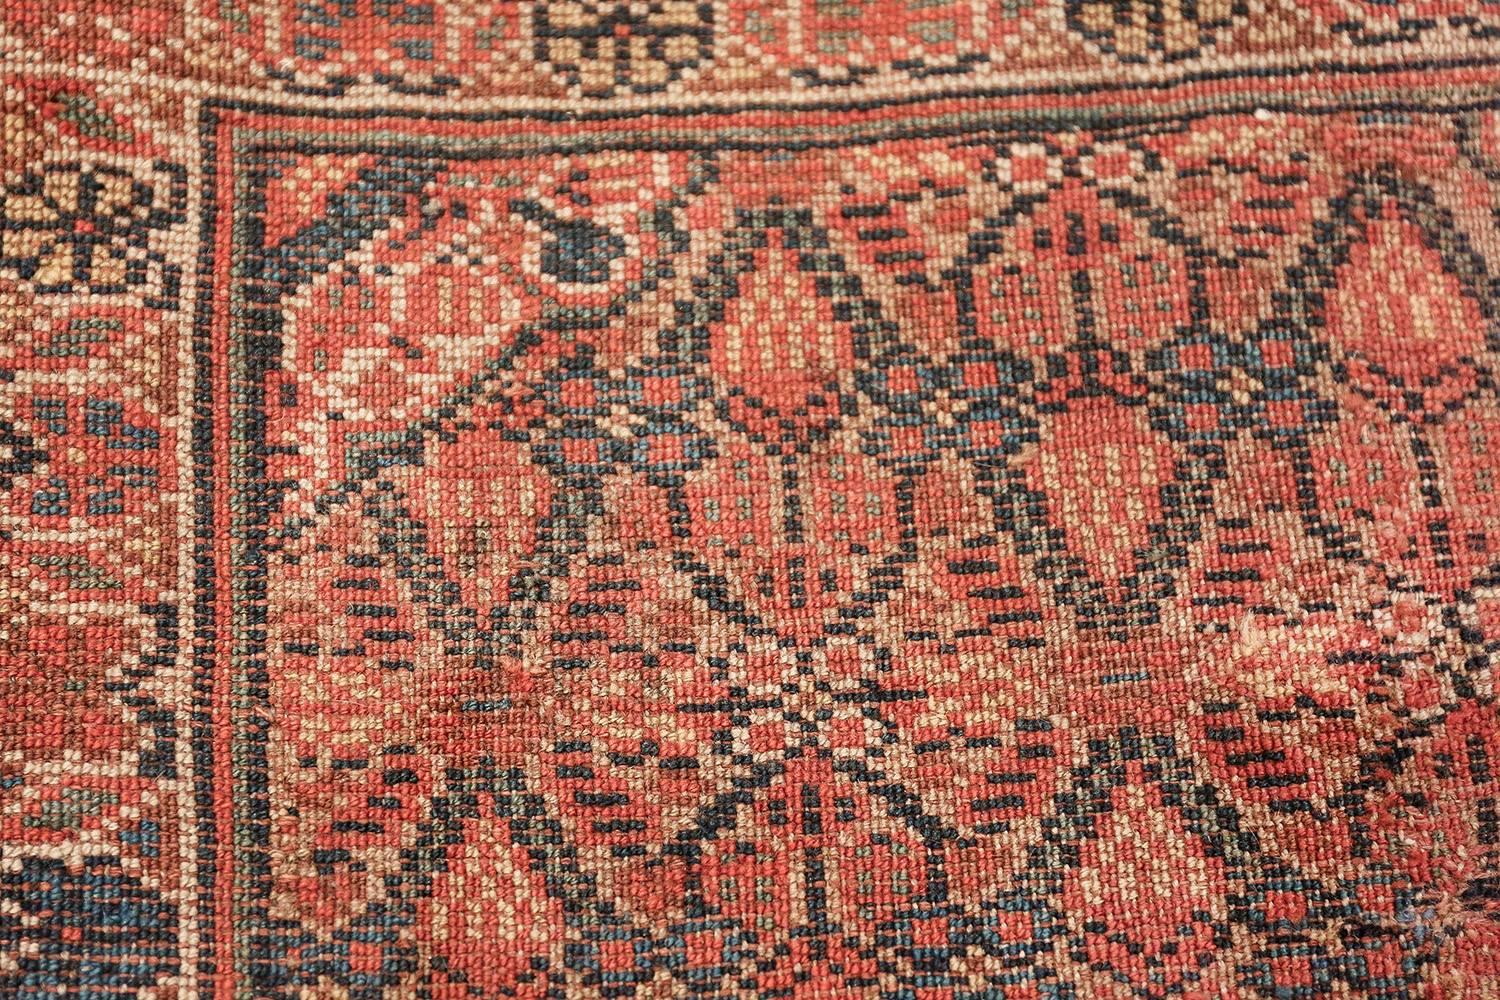 Beautiful long and narrow antique tribal Persian Serab runner rug, country of origin / rug type: Persian rug, circa date: 1900 this glorious antique tribal Persian Serab rug is a work of artistic complexity and profound beauty.

A magnificently